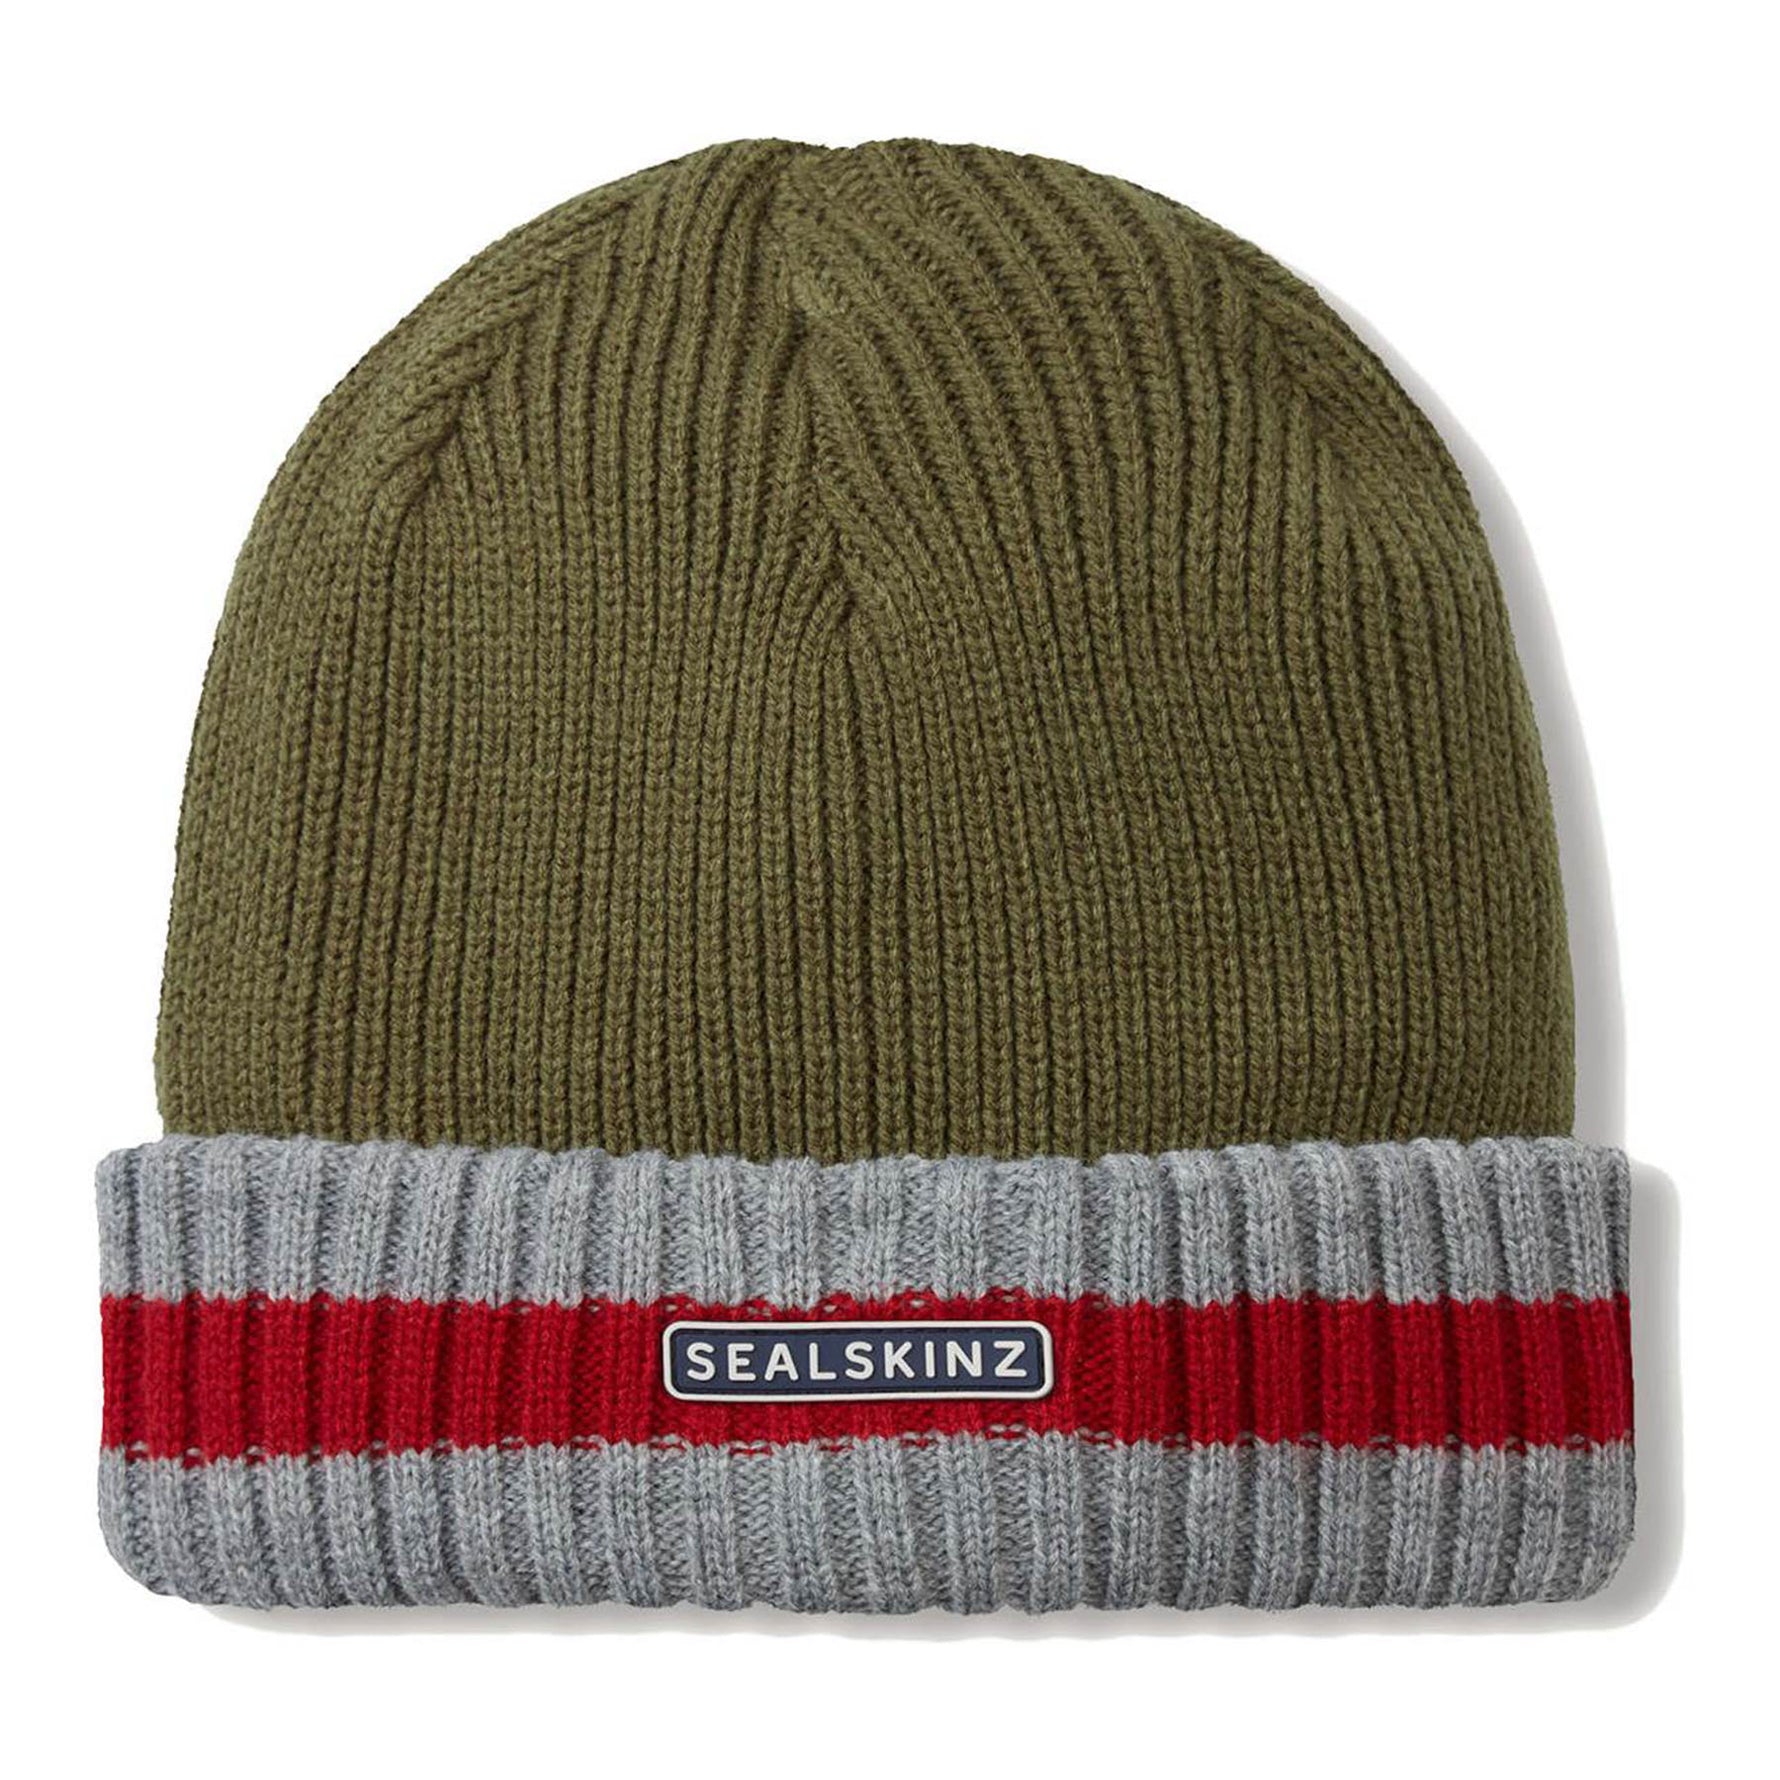 Seal Skinz Holkham Waterproof Cold Weather Striped Roll Cuff Beanie #color_olive-beige-orange